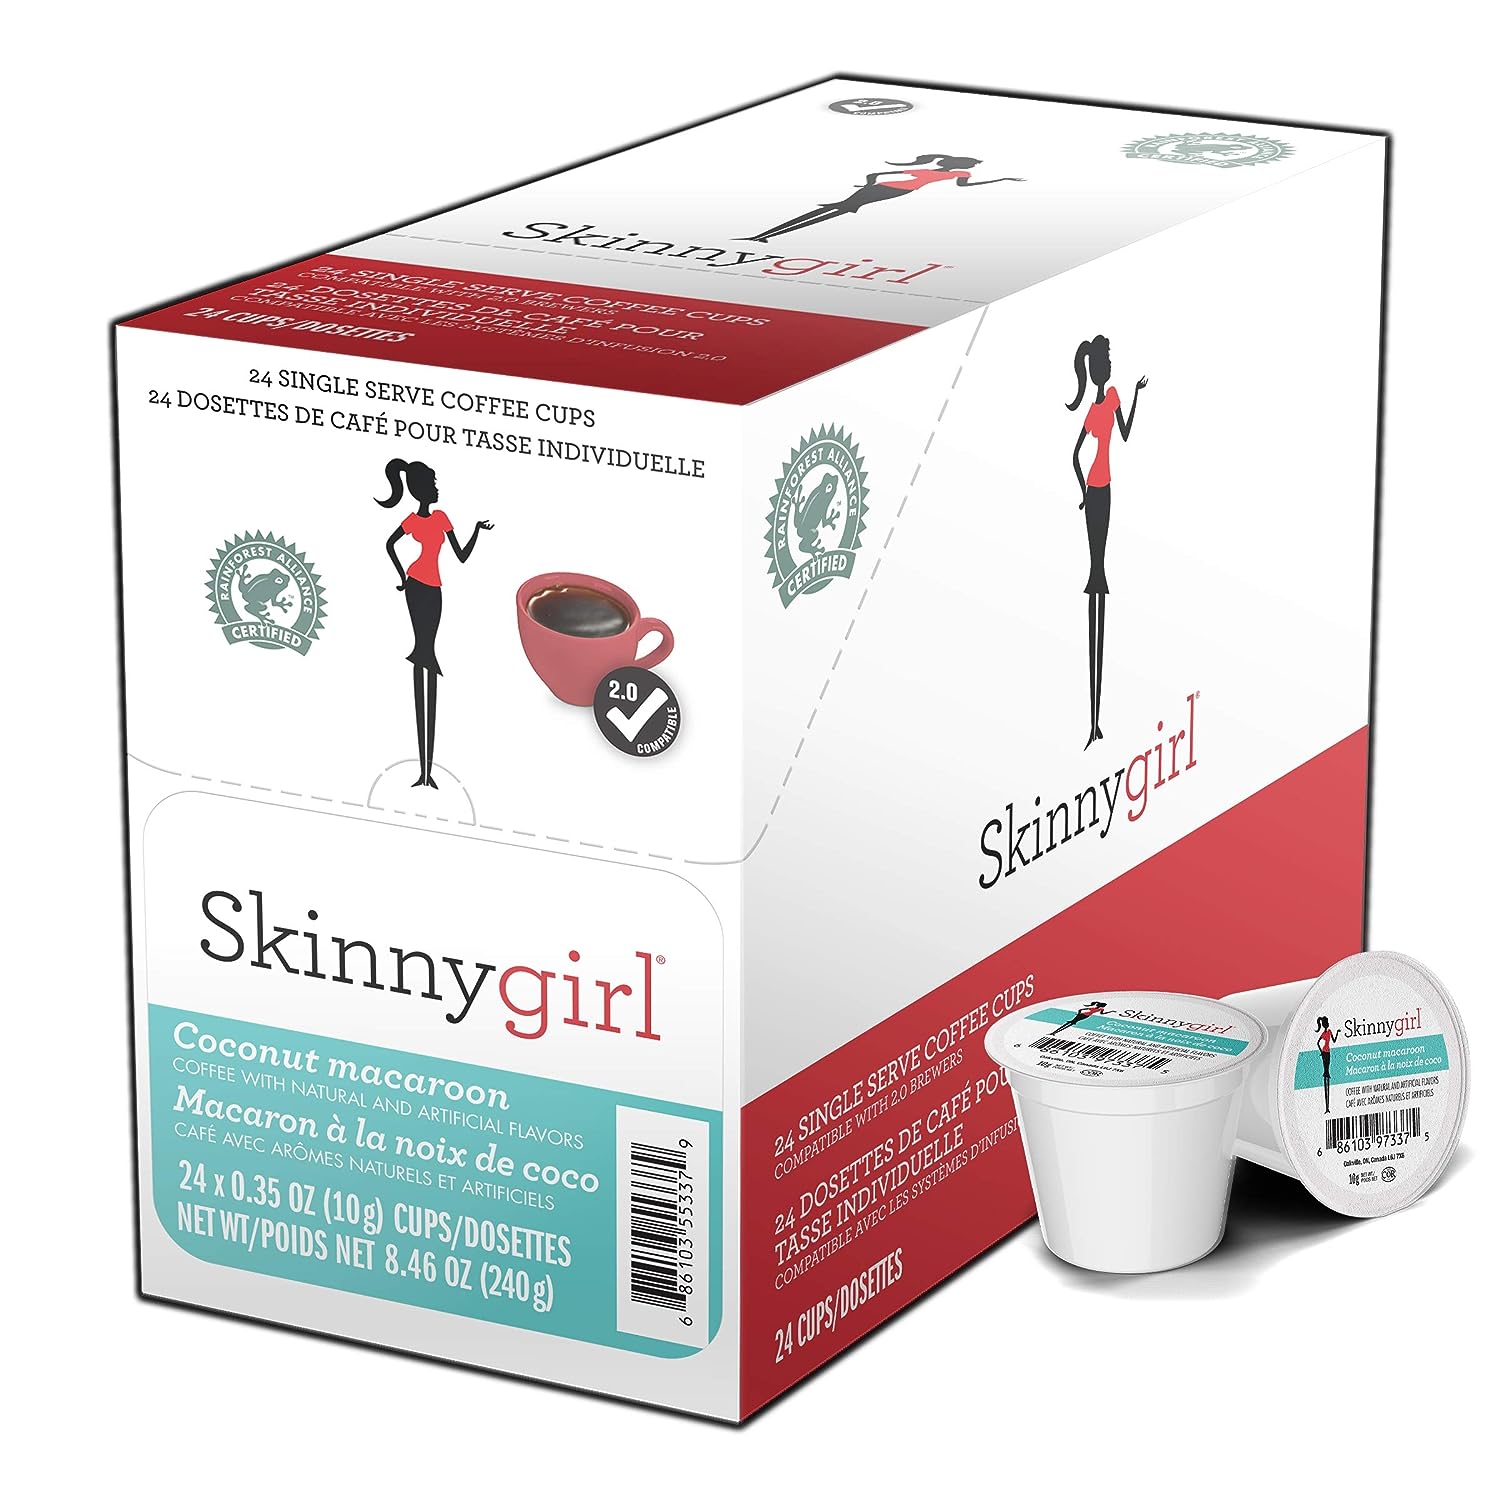 Skinnygirl Flavored Coffee Pods, Coconut Macaroon, Coconut Coffee, Single Serve Coffee for Keurig K Cups Machines, Hot or Iced Coffee, Medium Roast Coffee in Recyclable Pods, 24 Count